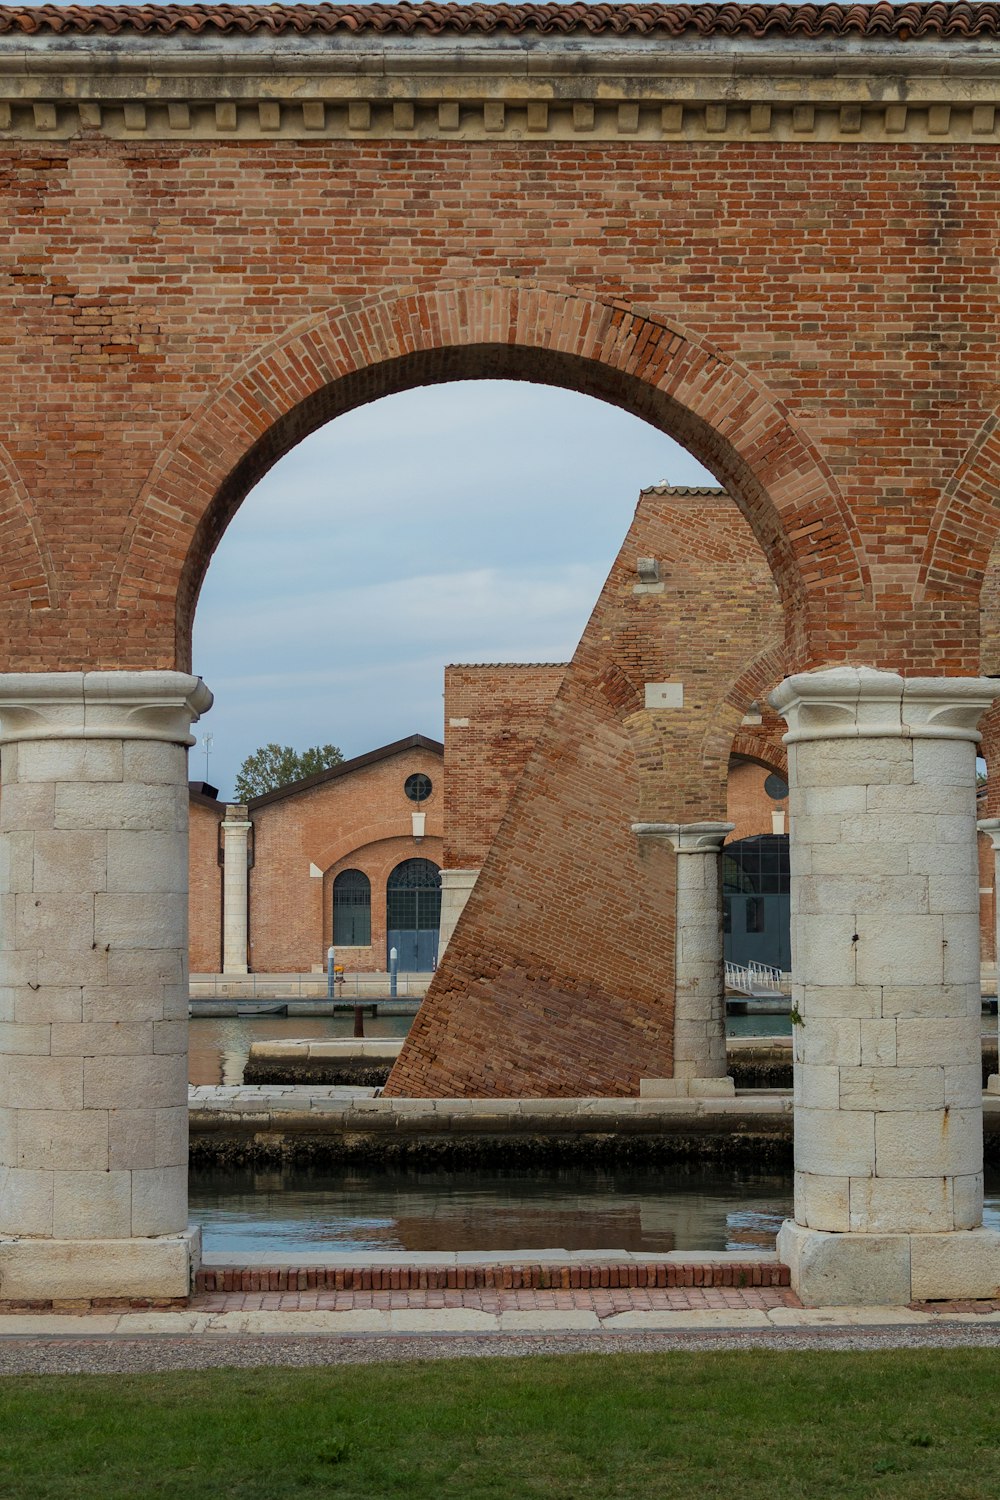 a brick archway over a pond